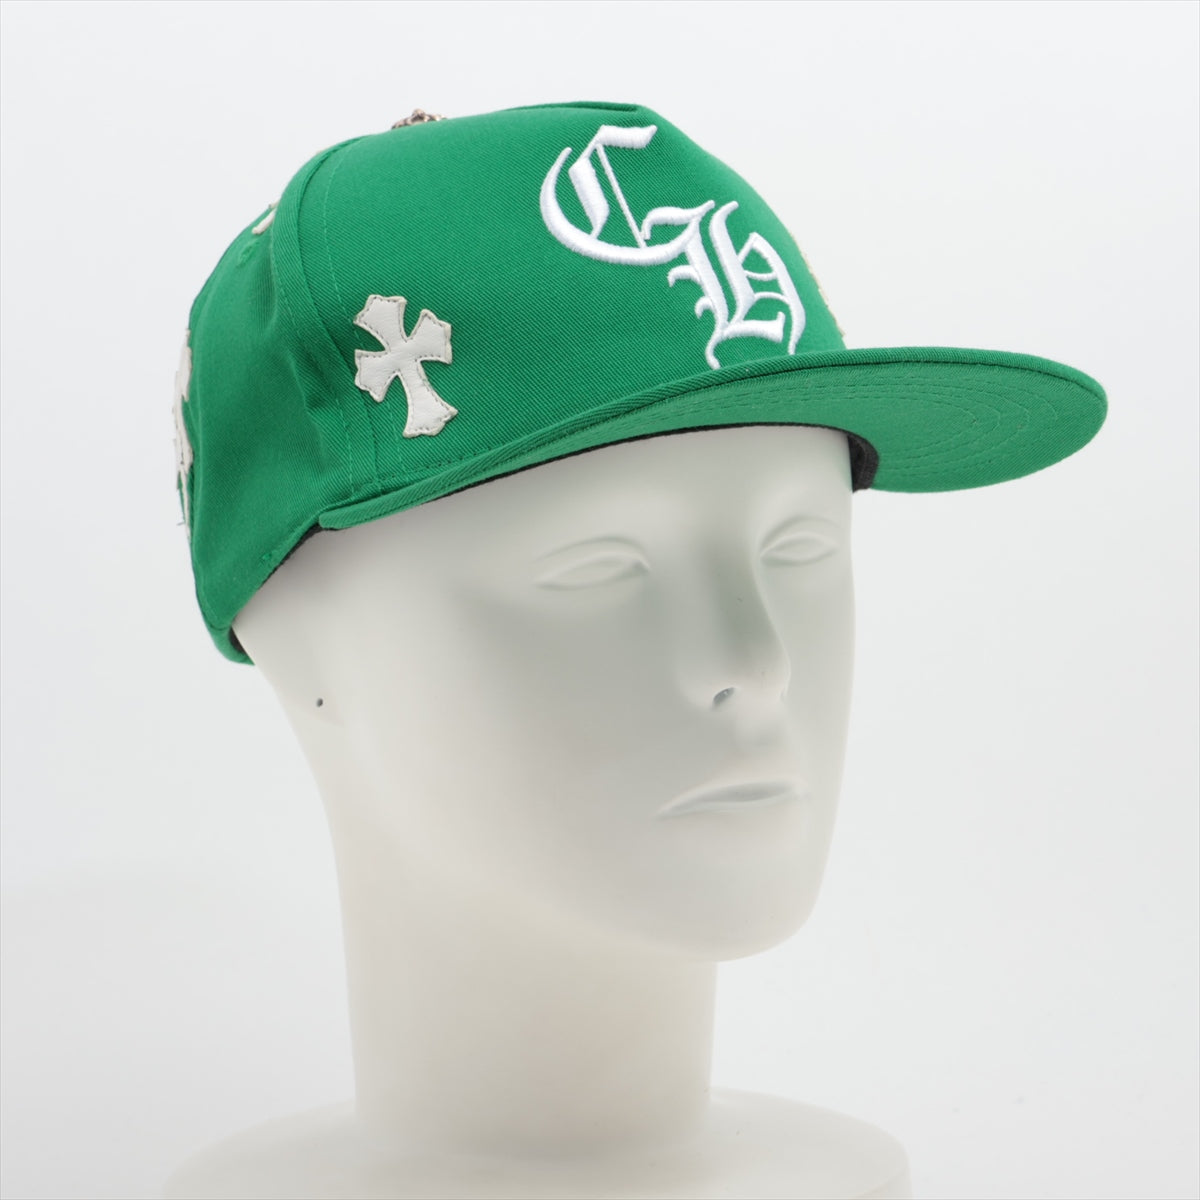 Chrome Hearts baseball cap Cotton & Polyester ONE SIZE 53-60 Green Cross Patch